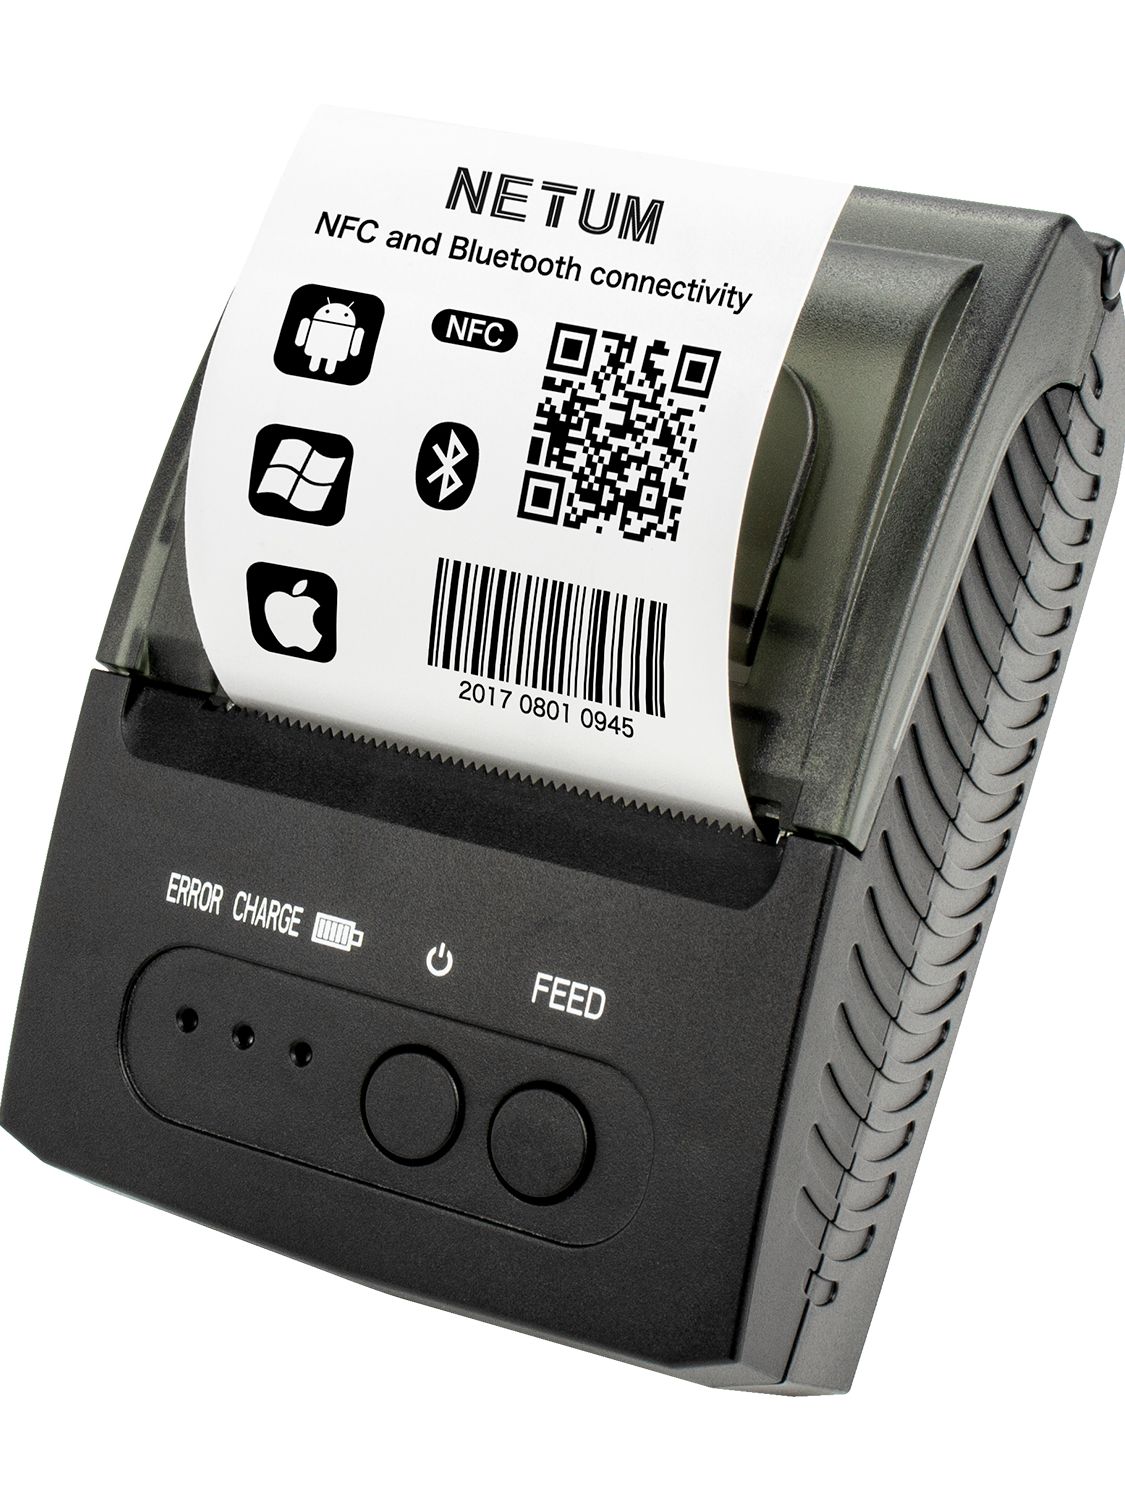 NETUM 1809 Mini Portable 58mm Bluetooth Thermal Receipt Printer Support Android /IOS USB Thermal Printer for POS System